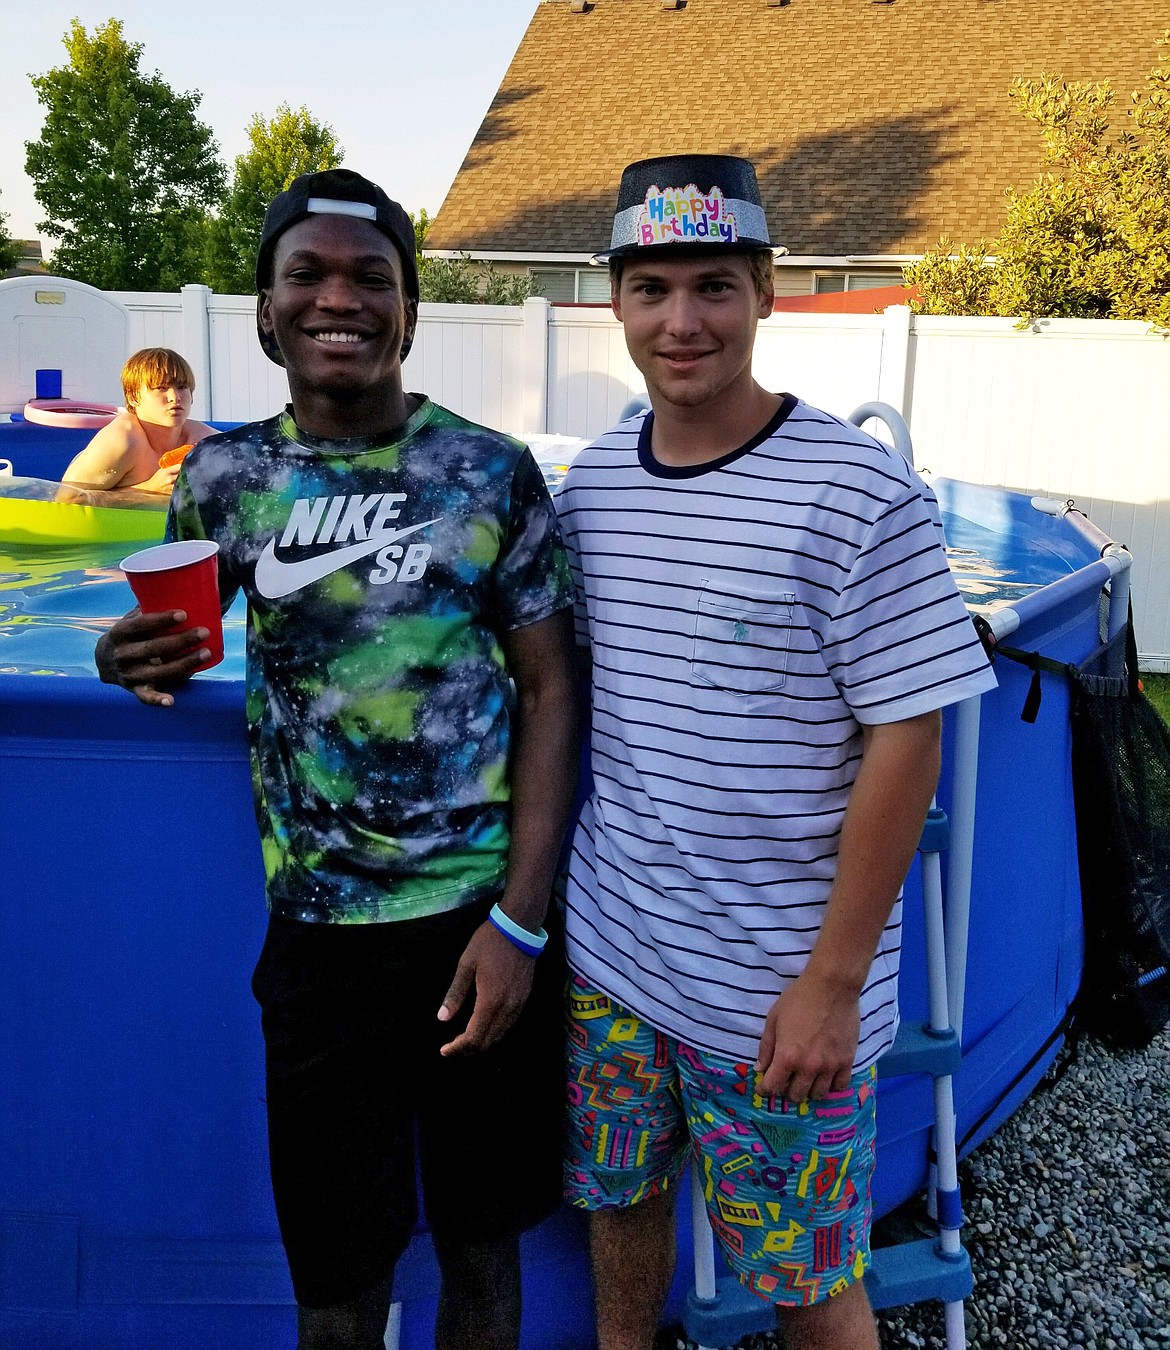 Abdoul Akimana, left, and Carson Noordam, 18, of Coeur d&#146;Alene, are best buddies. They&#146;re seen here in July celebrating Carson&#146;s birthday. (Courtesy photo)